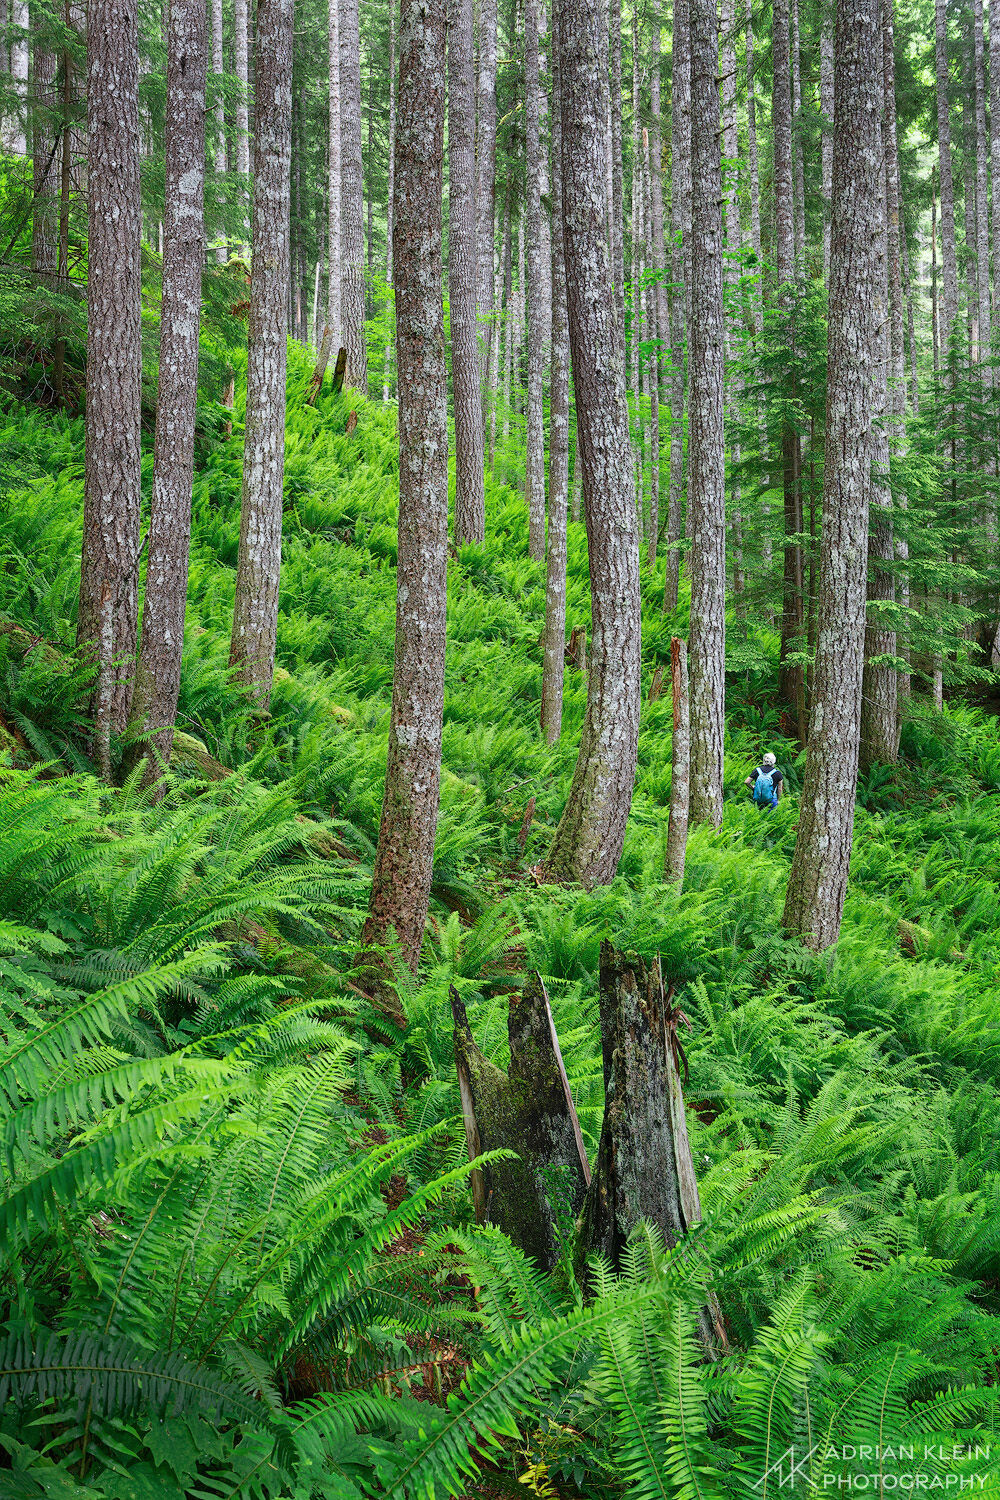 My friend David Cobb walking the trail as ferns come alive in spring. Limited Edition of 100.